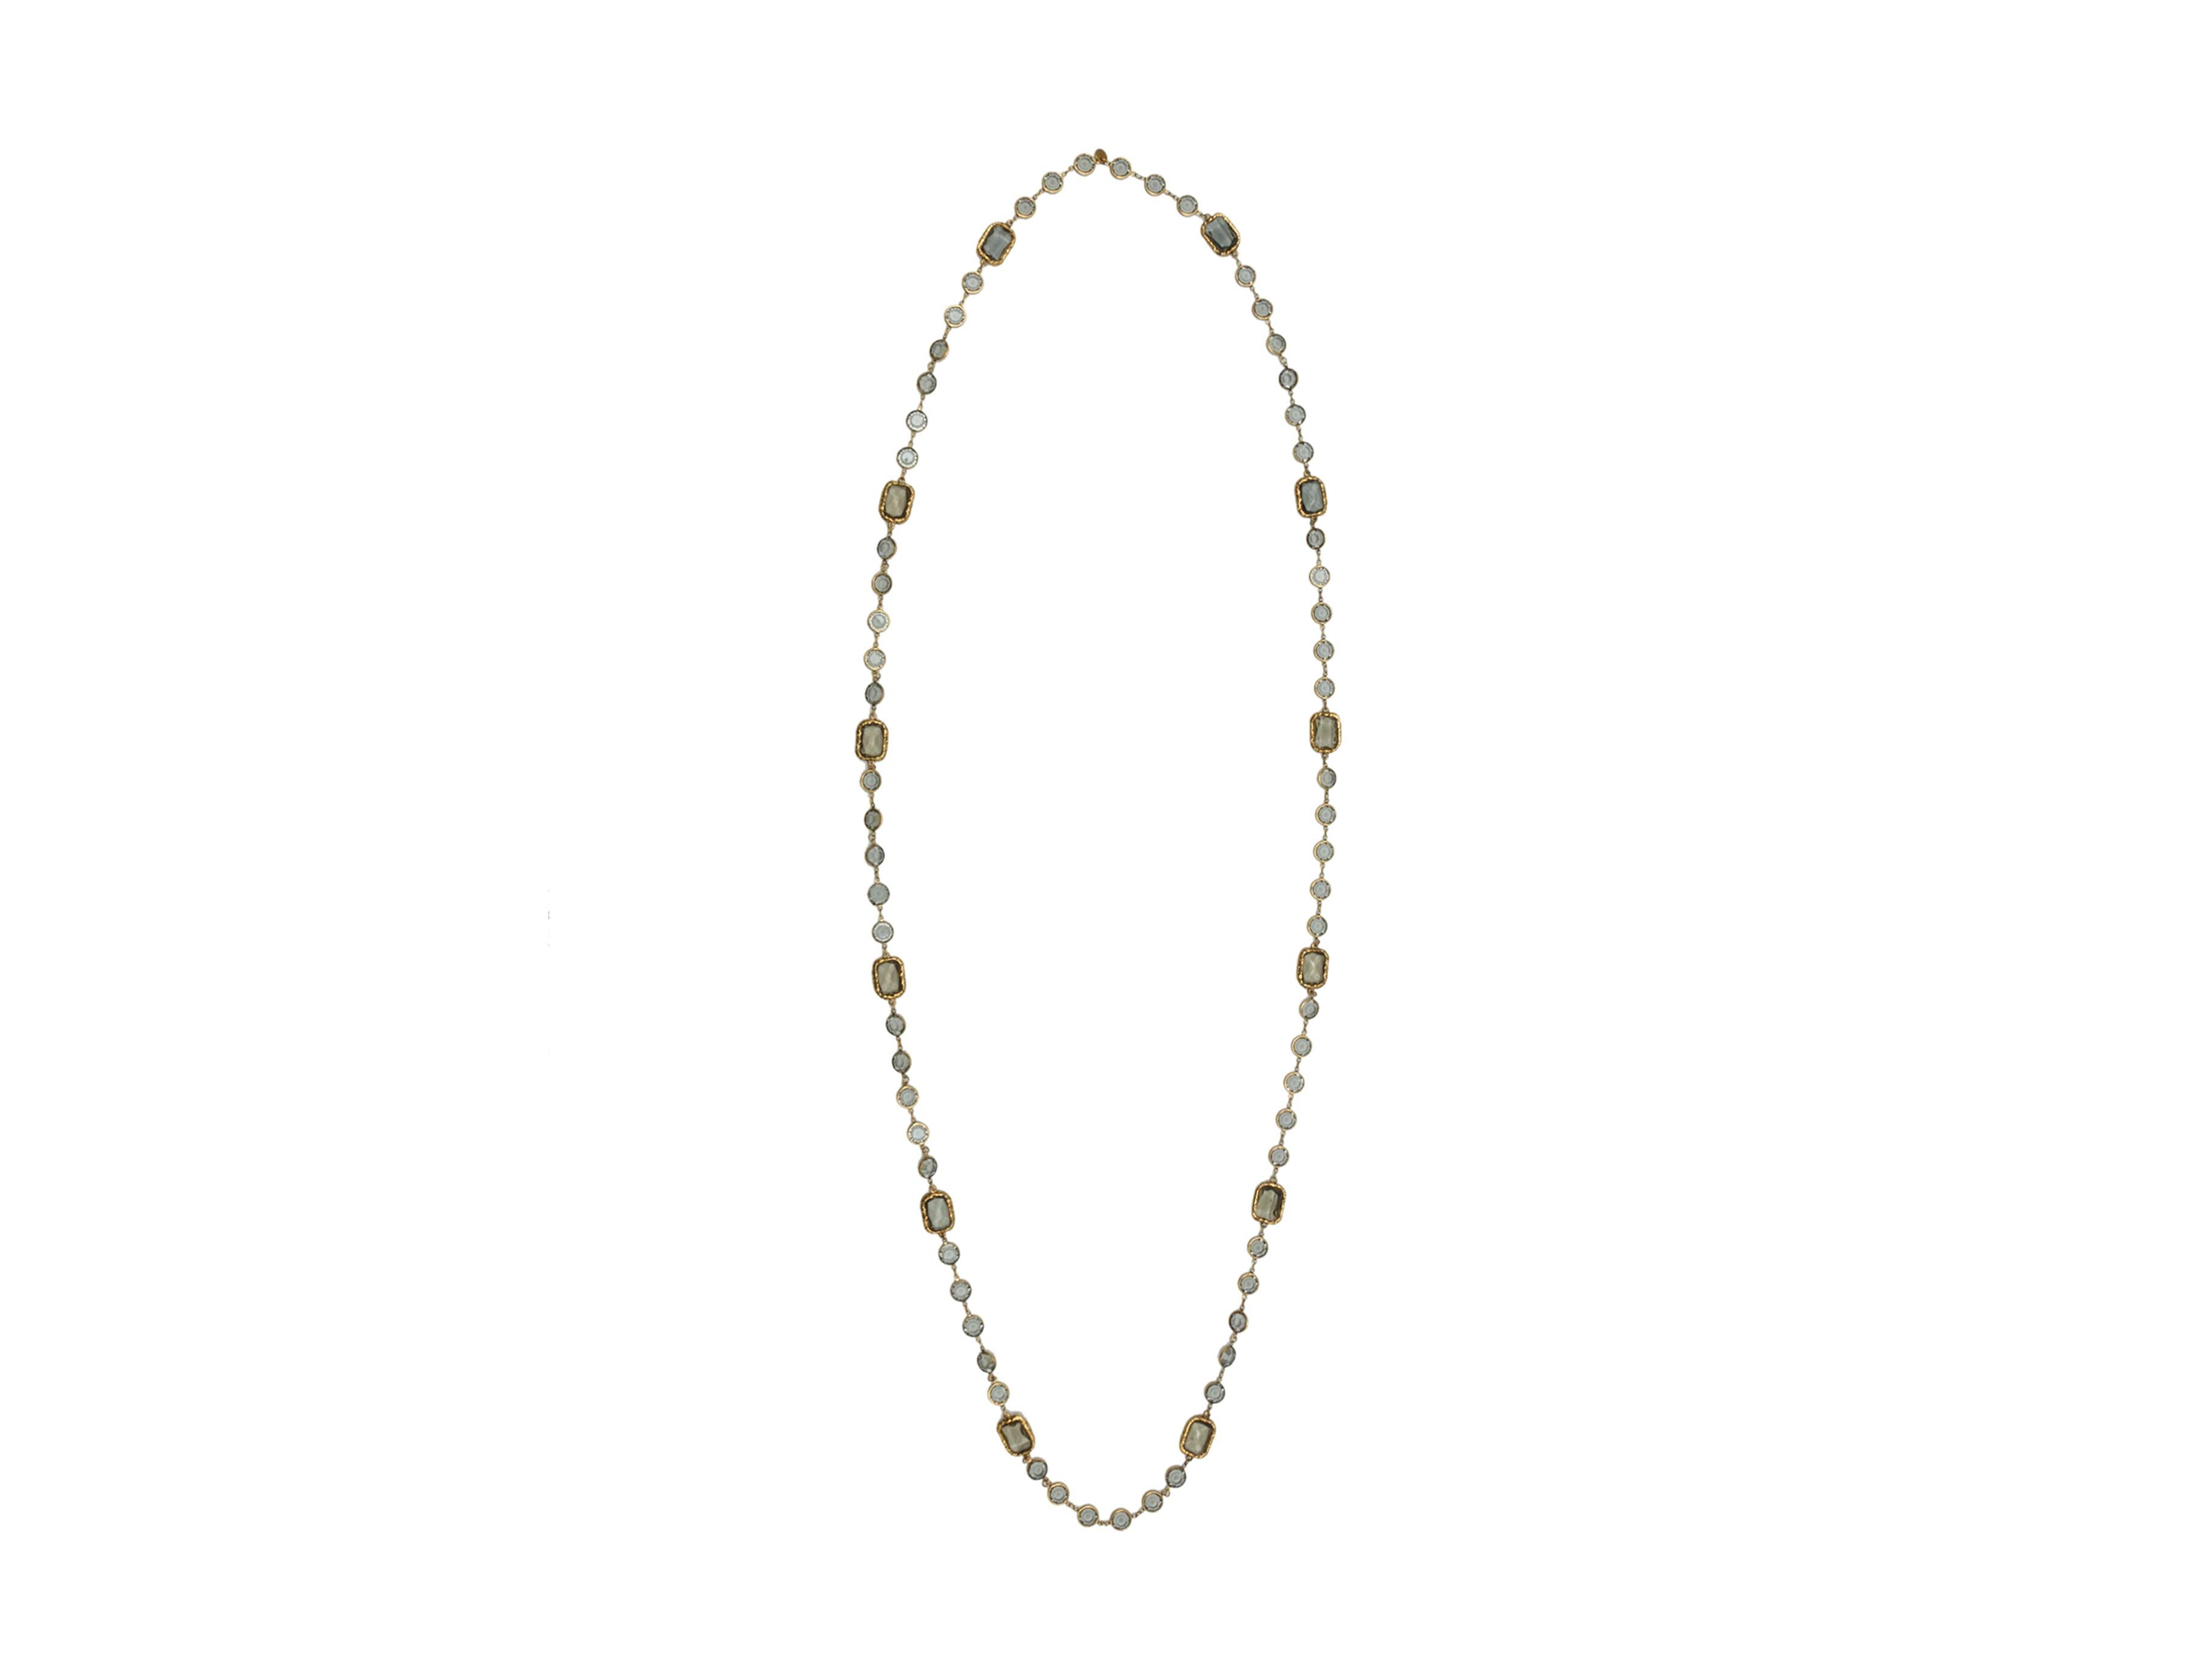 Product details: Vintage 1981 gold-tone and crystal long necklace by Chanel. No clasp. 30